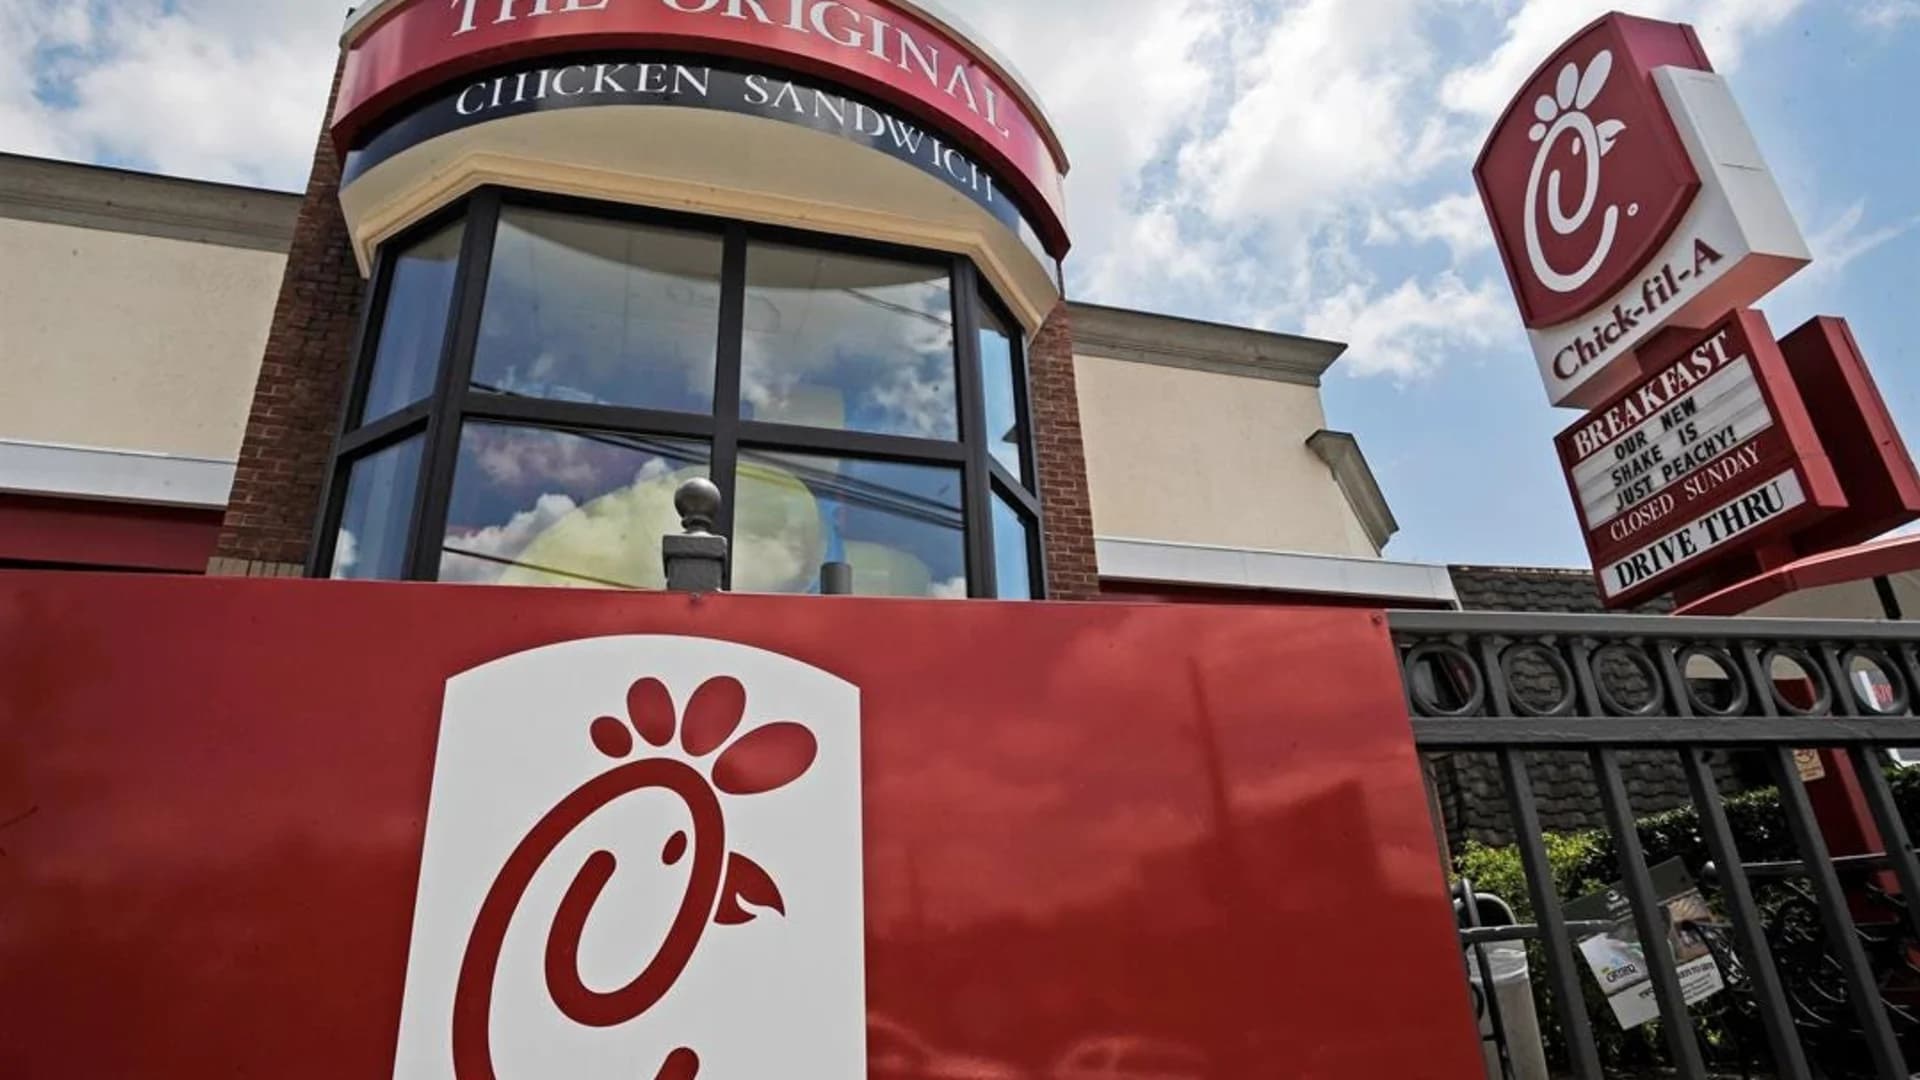 Chick-fil-A gives free nuggets to app users in January